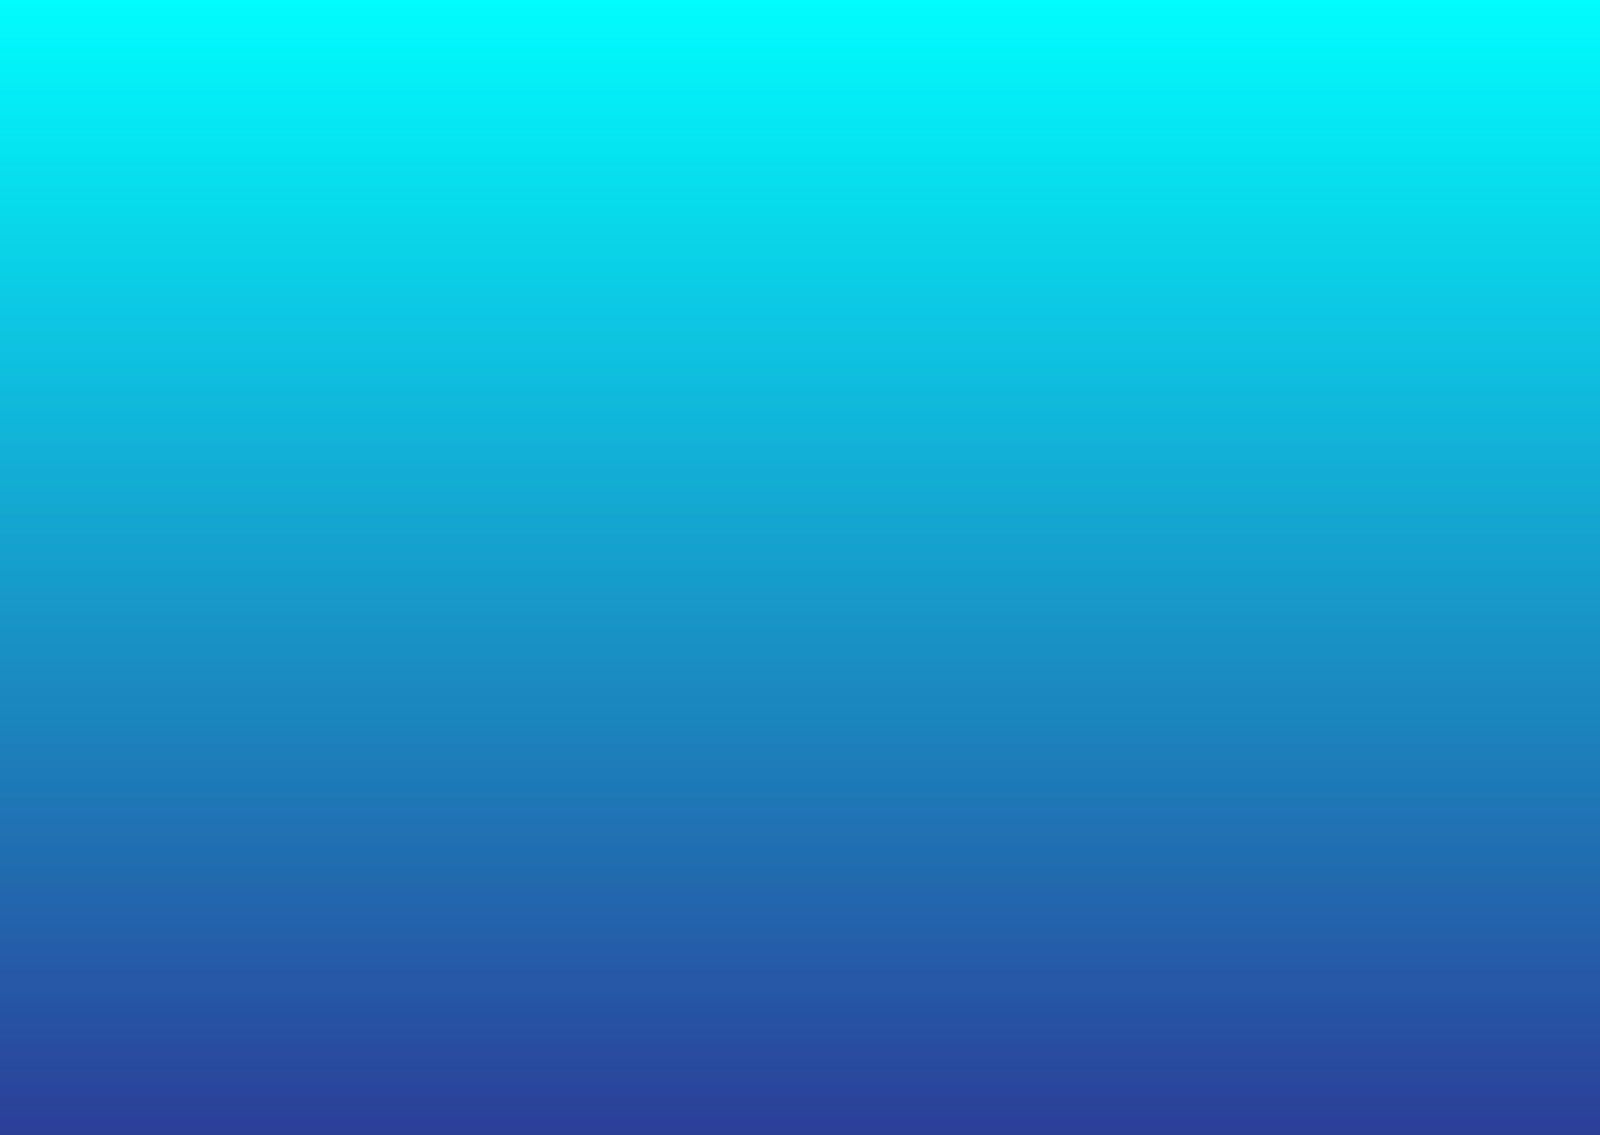 Do You Have the Smarts to Pass This General Knowledge Test? blue gradient